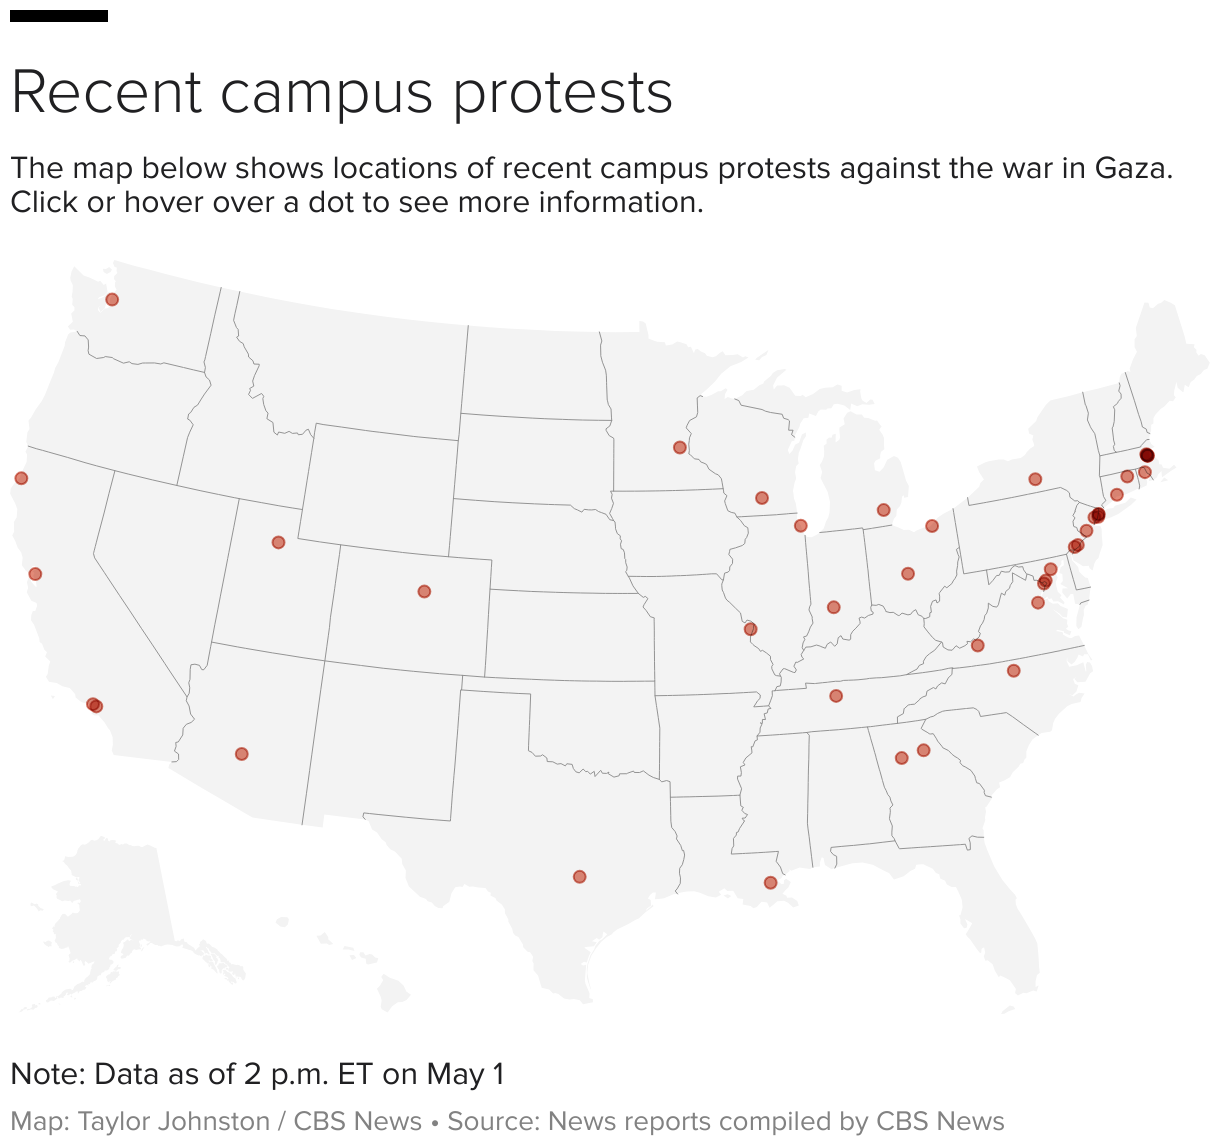 U.S. map showing locations of recent campus protests.